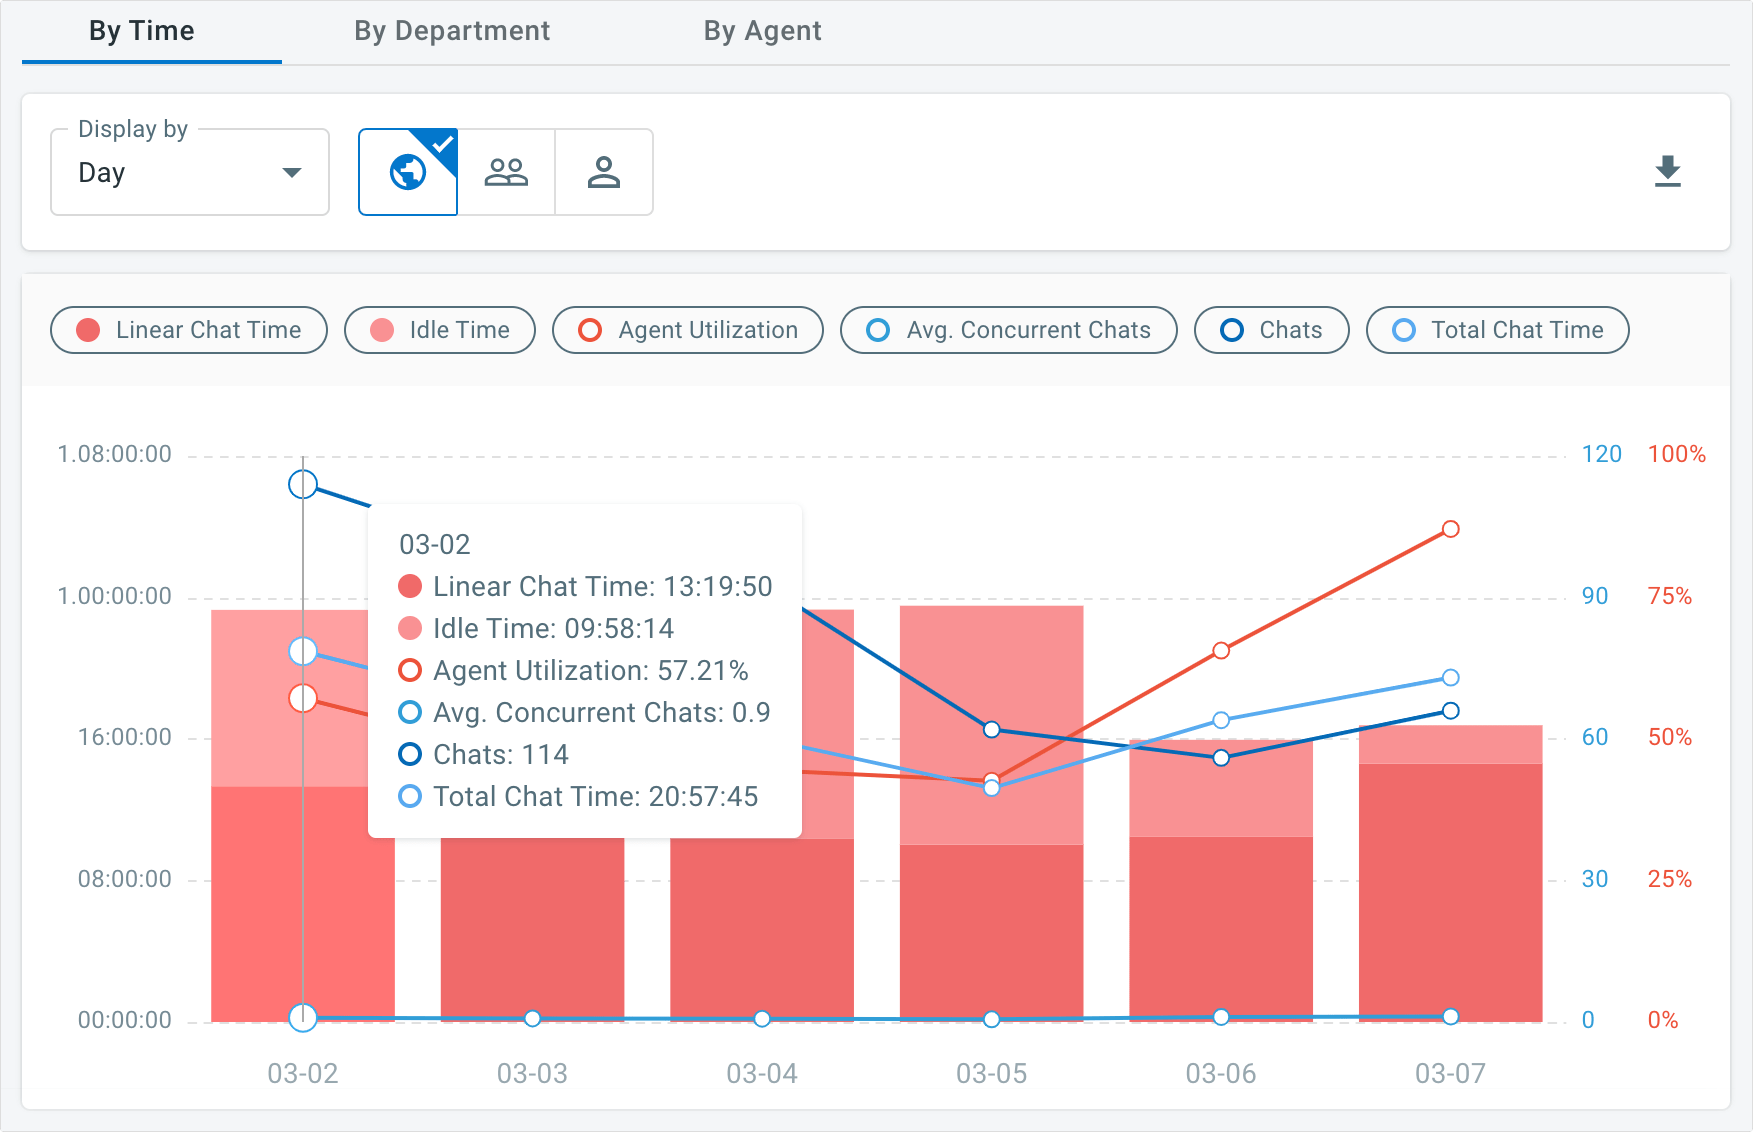 you can track the workload of the live chat team via comm100 reports